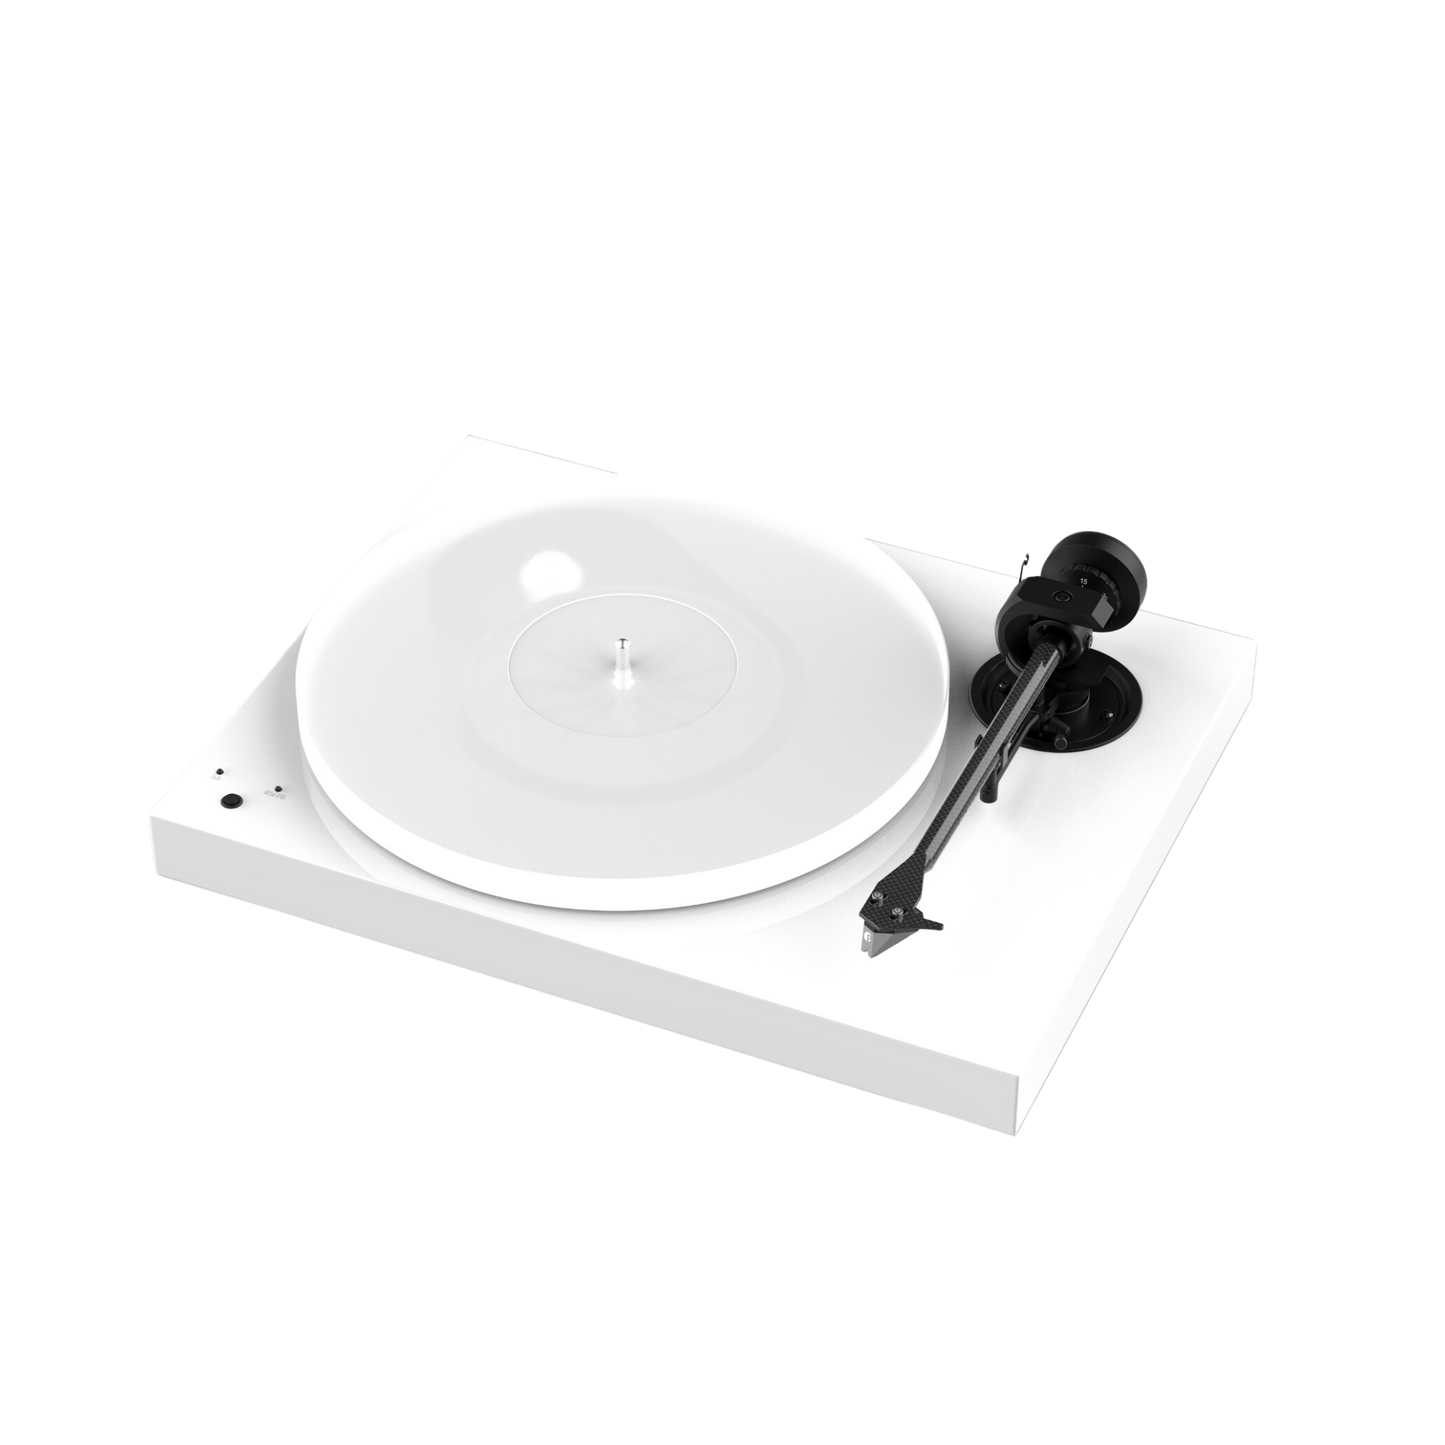 Pro-Ject X1 B Turntable (Pick It PRO Balanced Pre-Fitted)